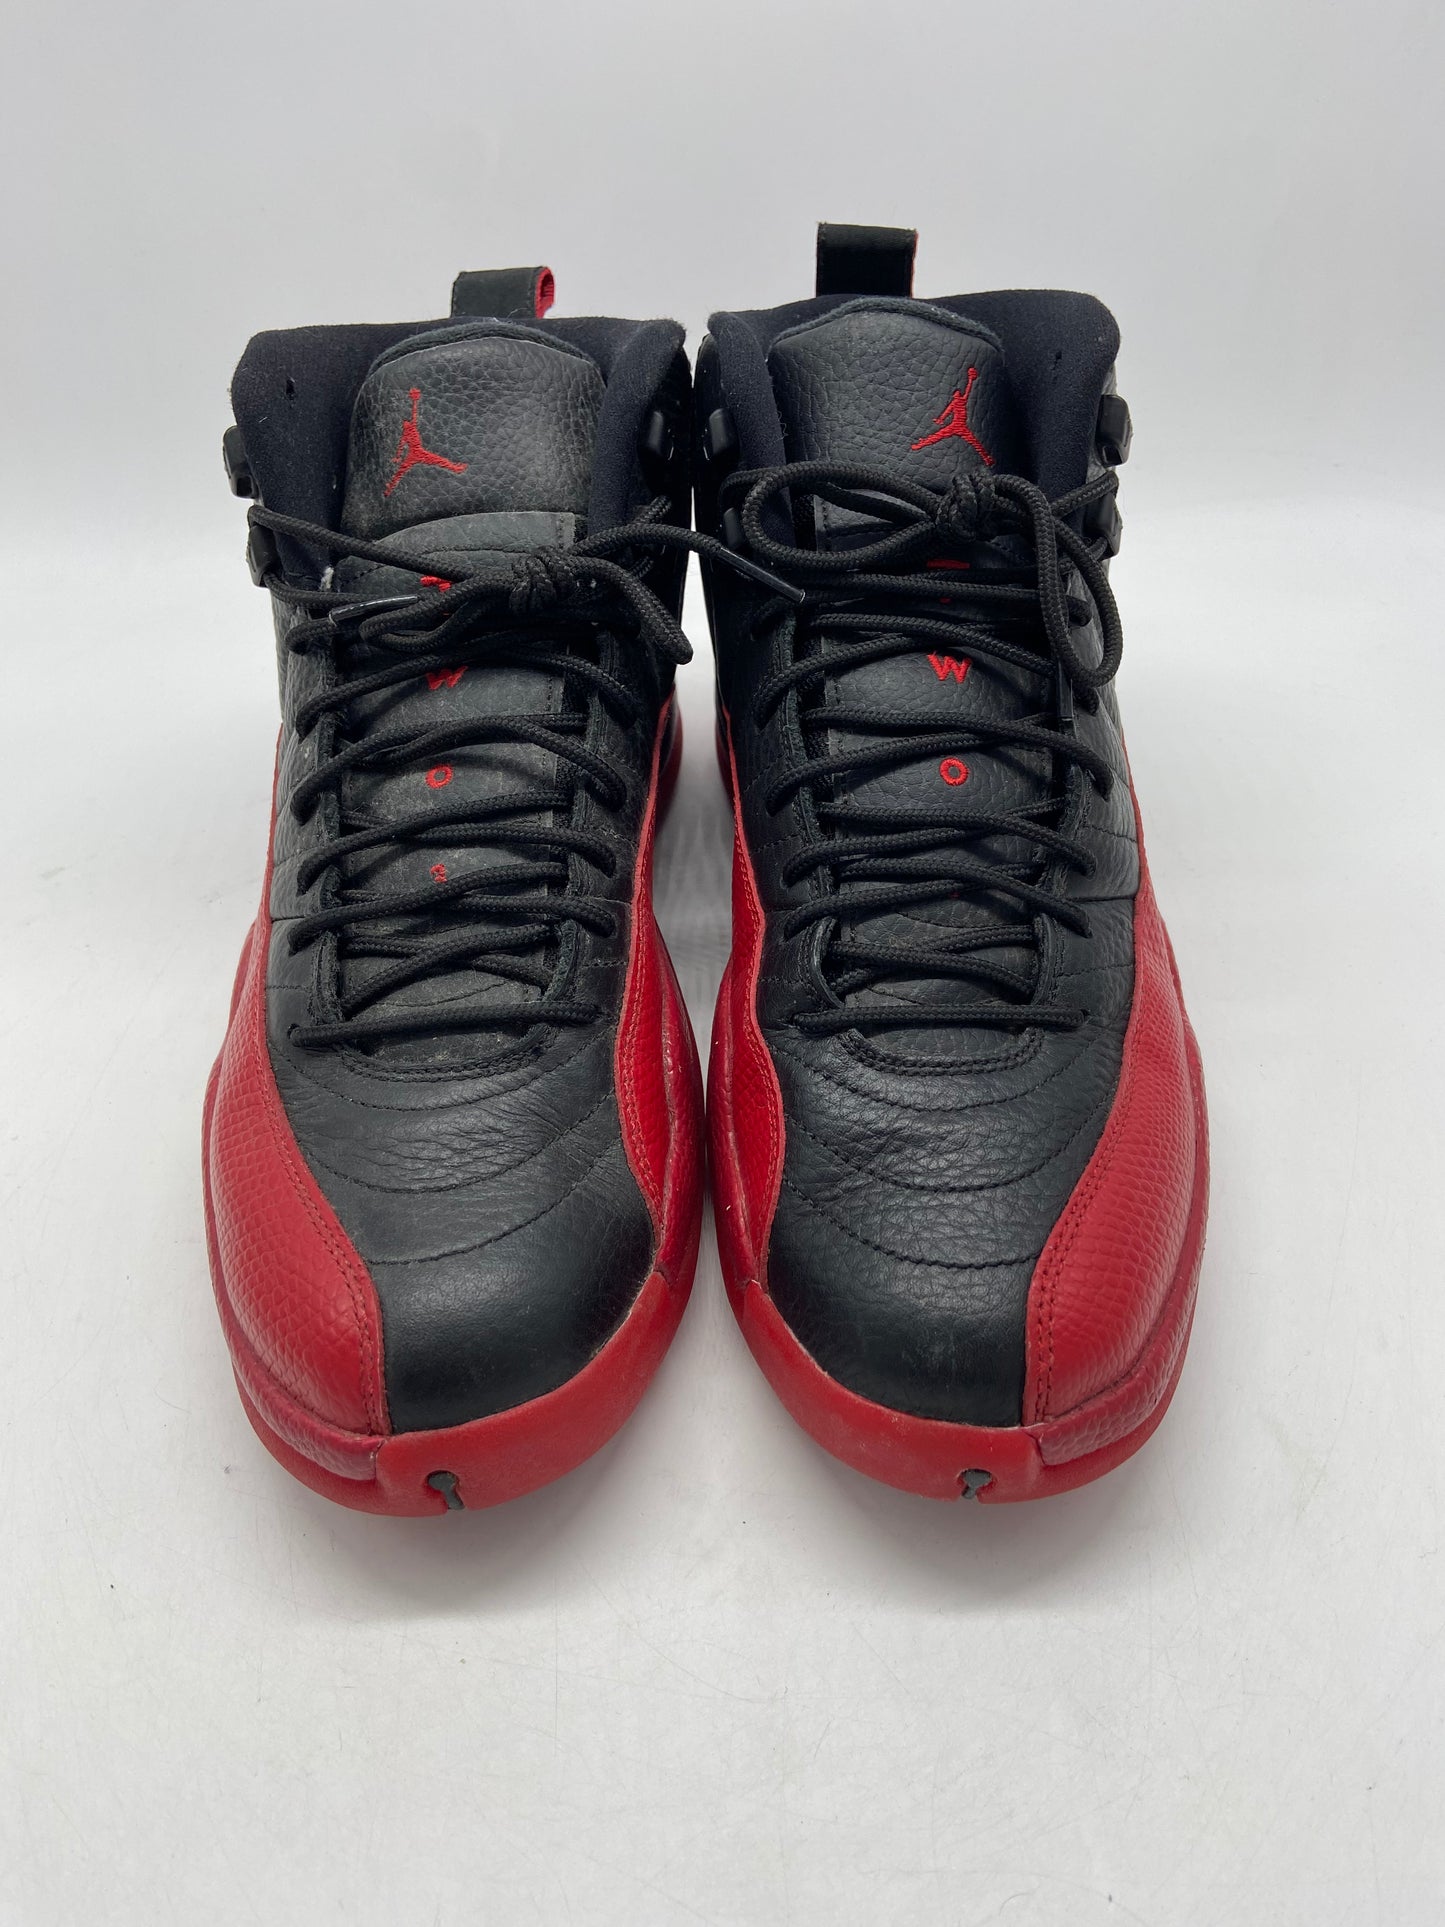 Load image into Gallery viewer, Preowned Air Jordan 12 Retro Flu Game (2016) Sz 9M/10.5W 130690-002
